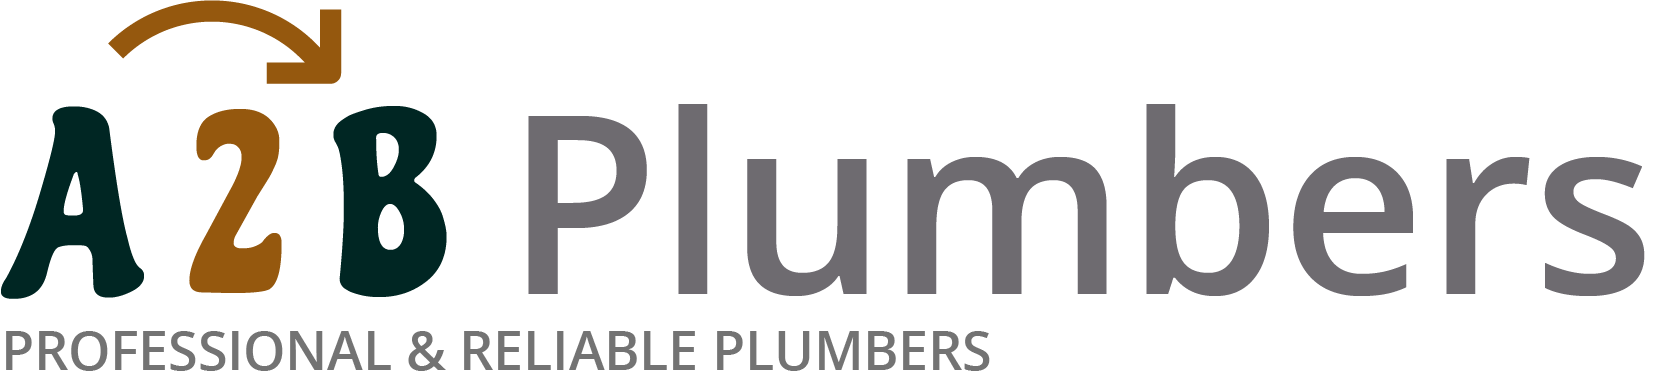 If you need a boiler installed, a radiator repaired or a leaking tap fixed, call us now - we provide services for properties in Purfleet and the local area.